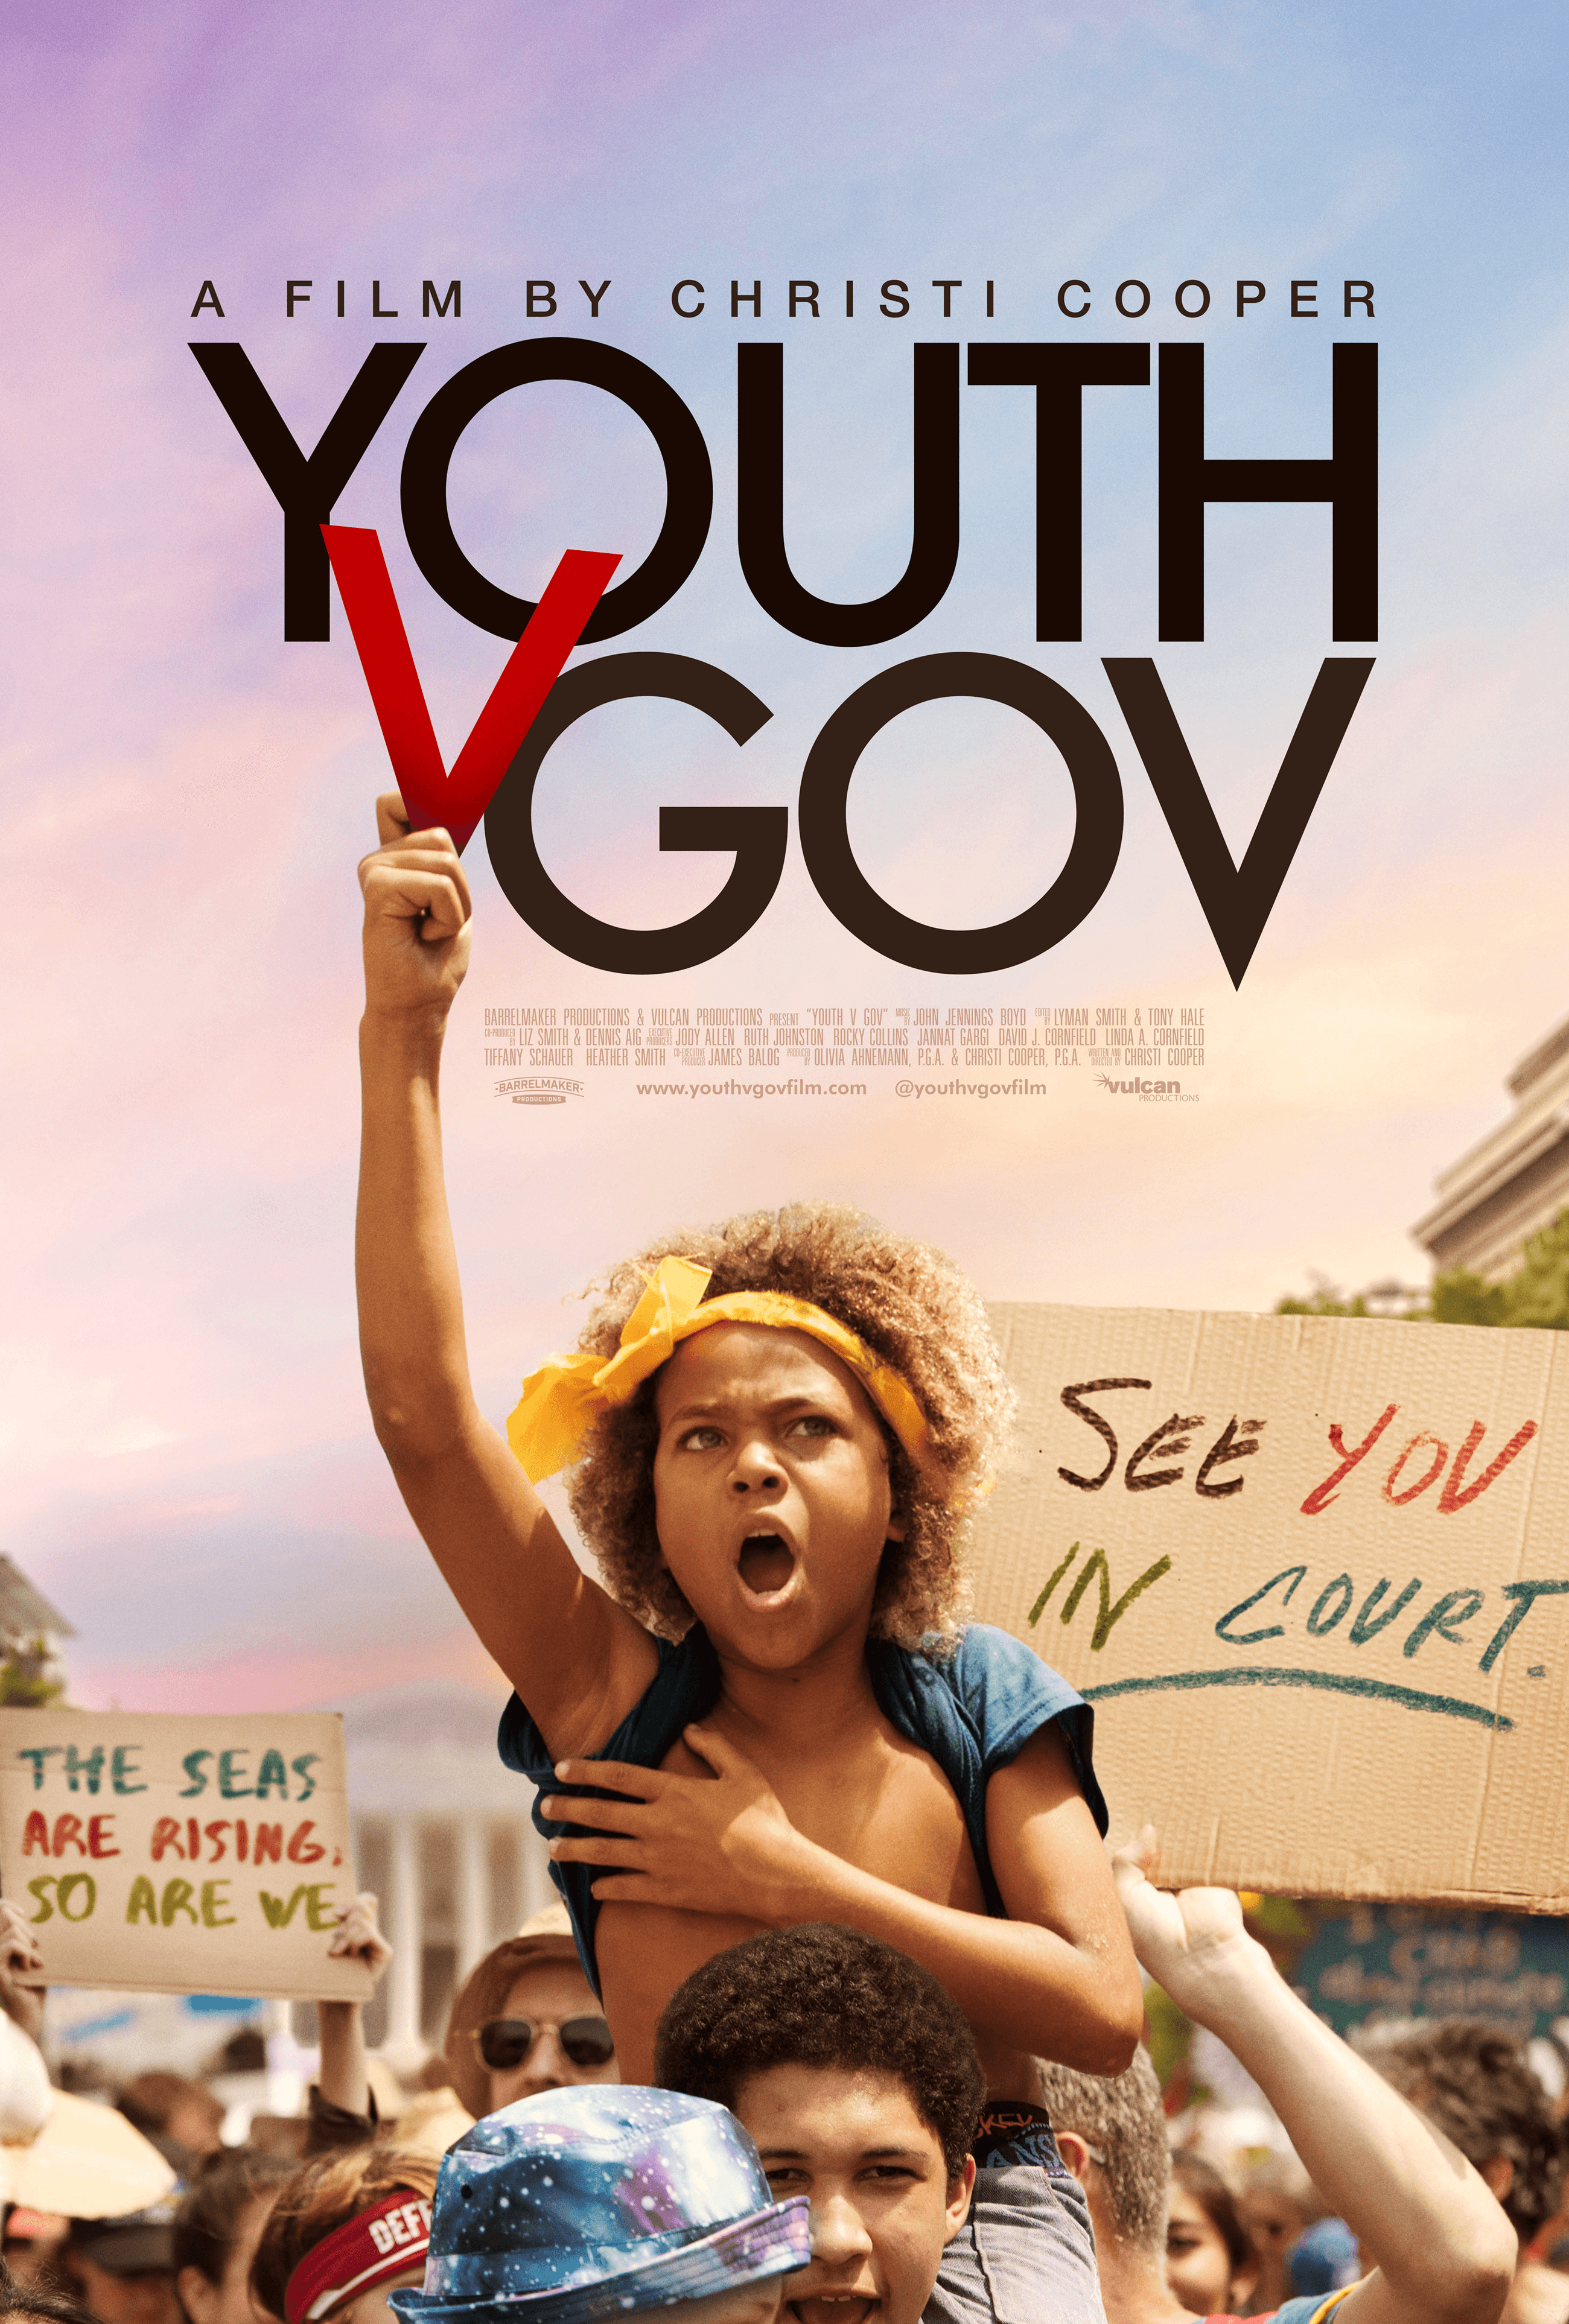 Youth V Gov poster with a young girl on a teen's shoulders during a protest.